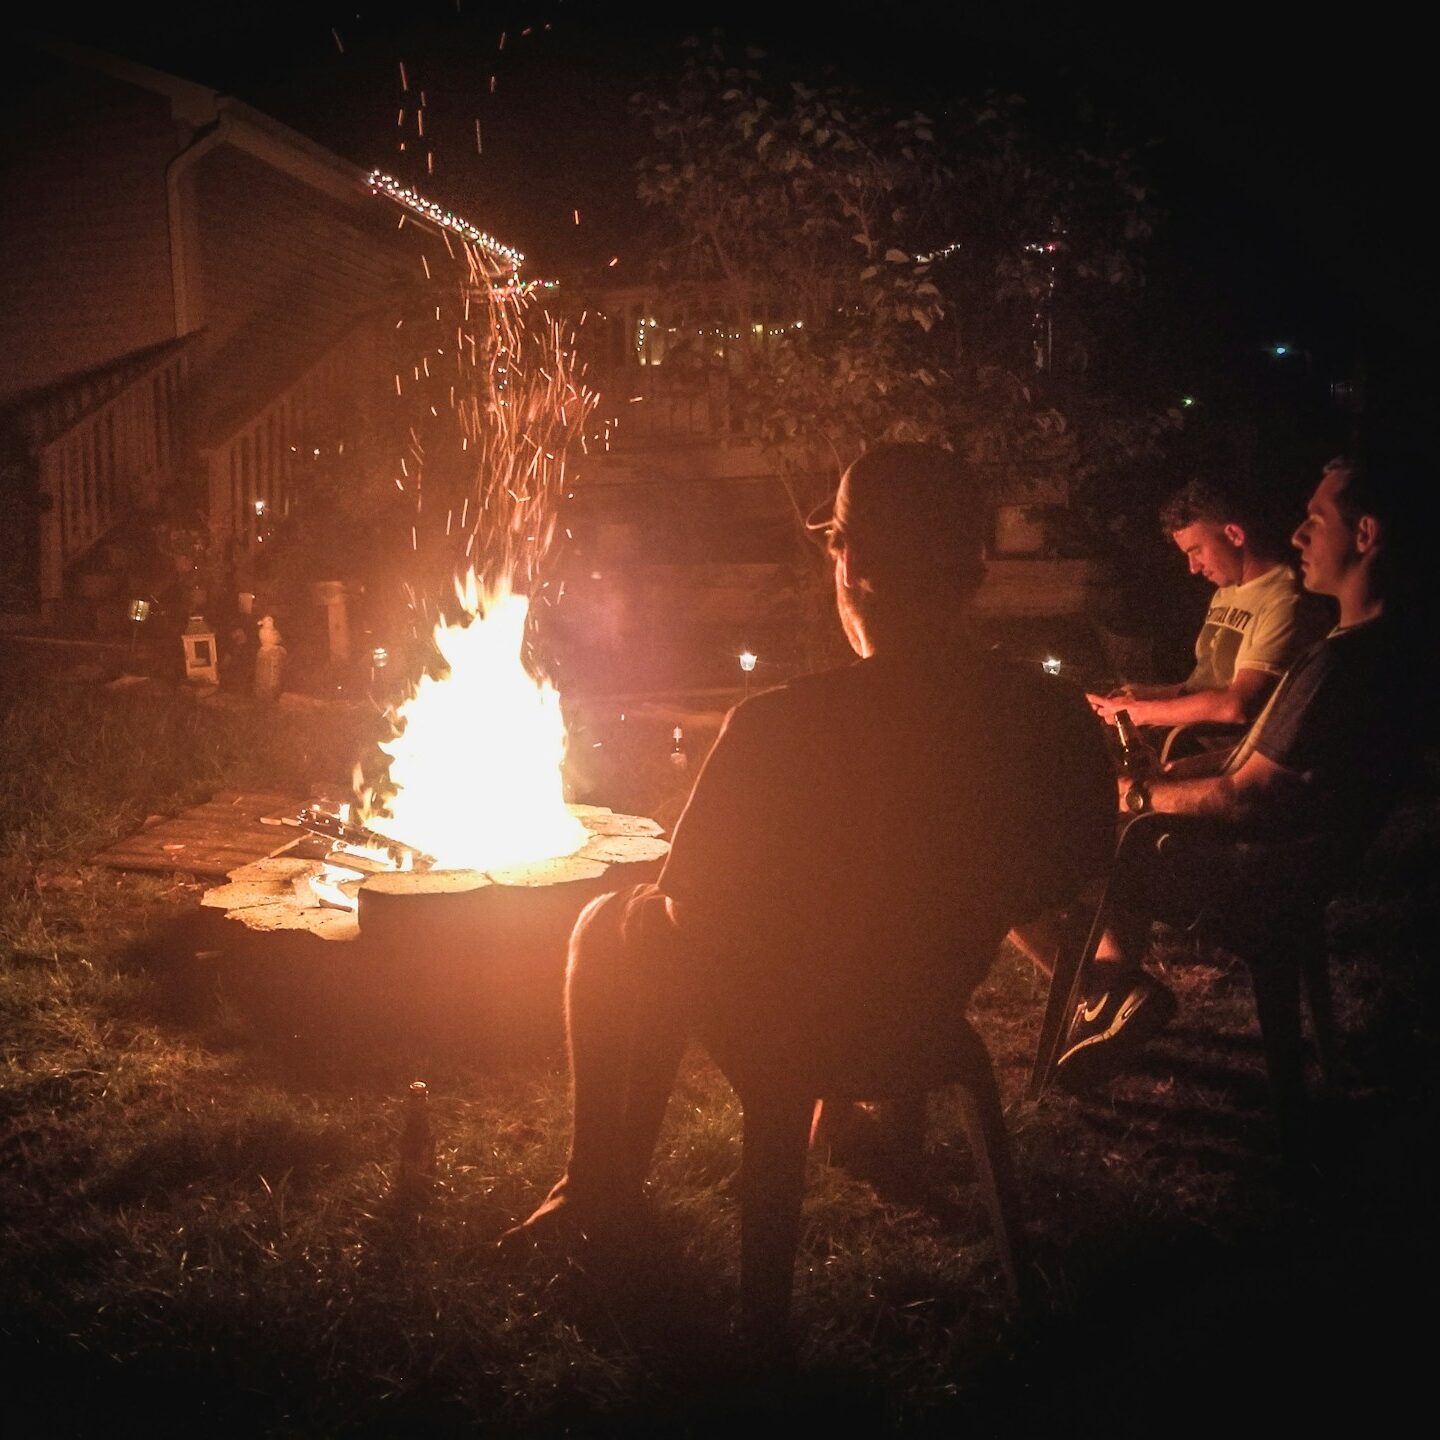 Discipleship and Sacred Fire